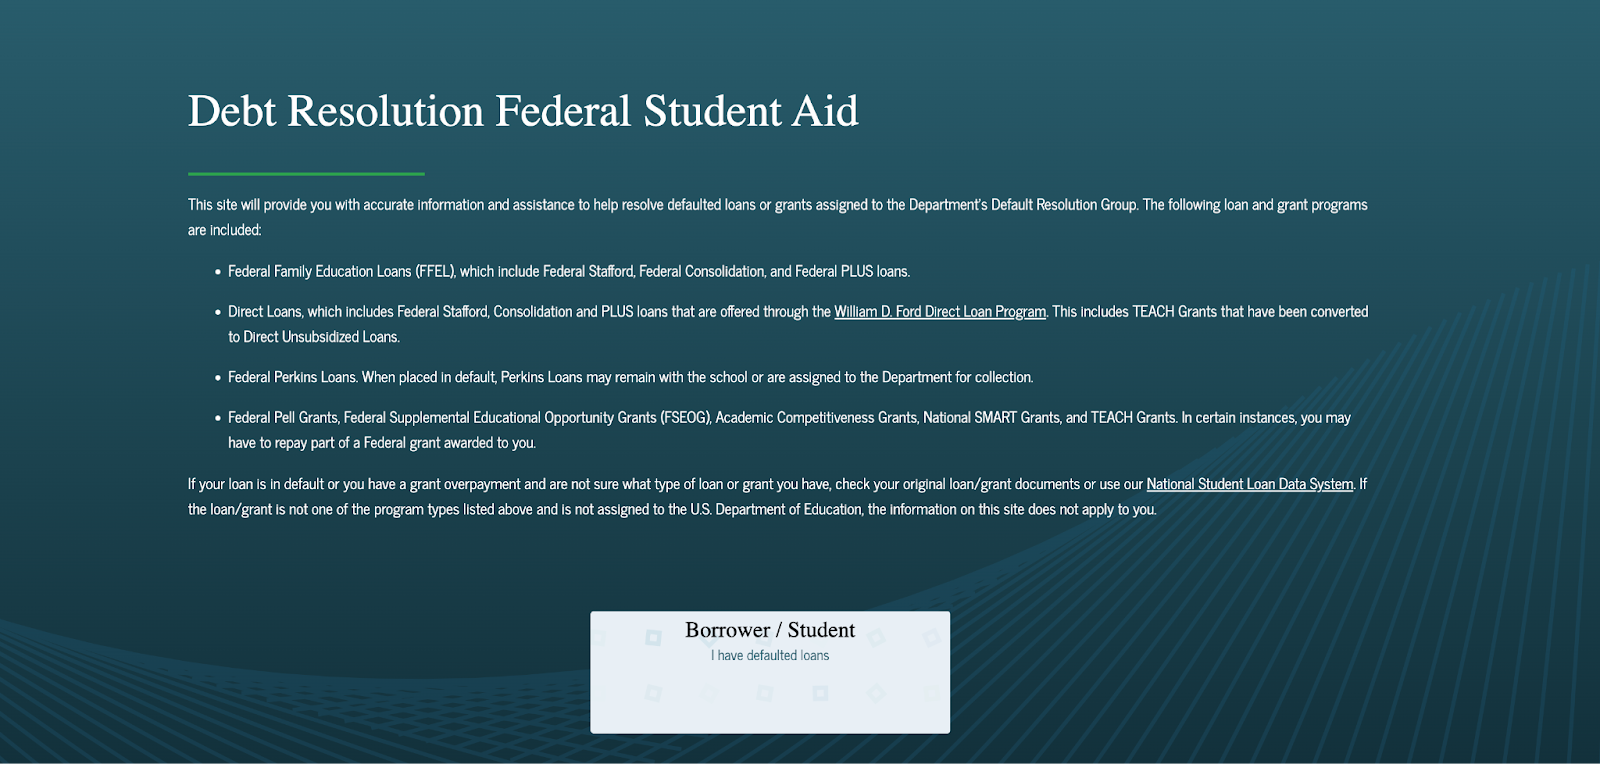 A screenshot of the debt resolution page for borrowers/students who have defaulted on their loans.